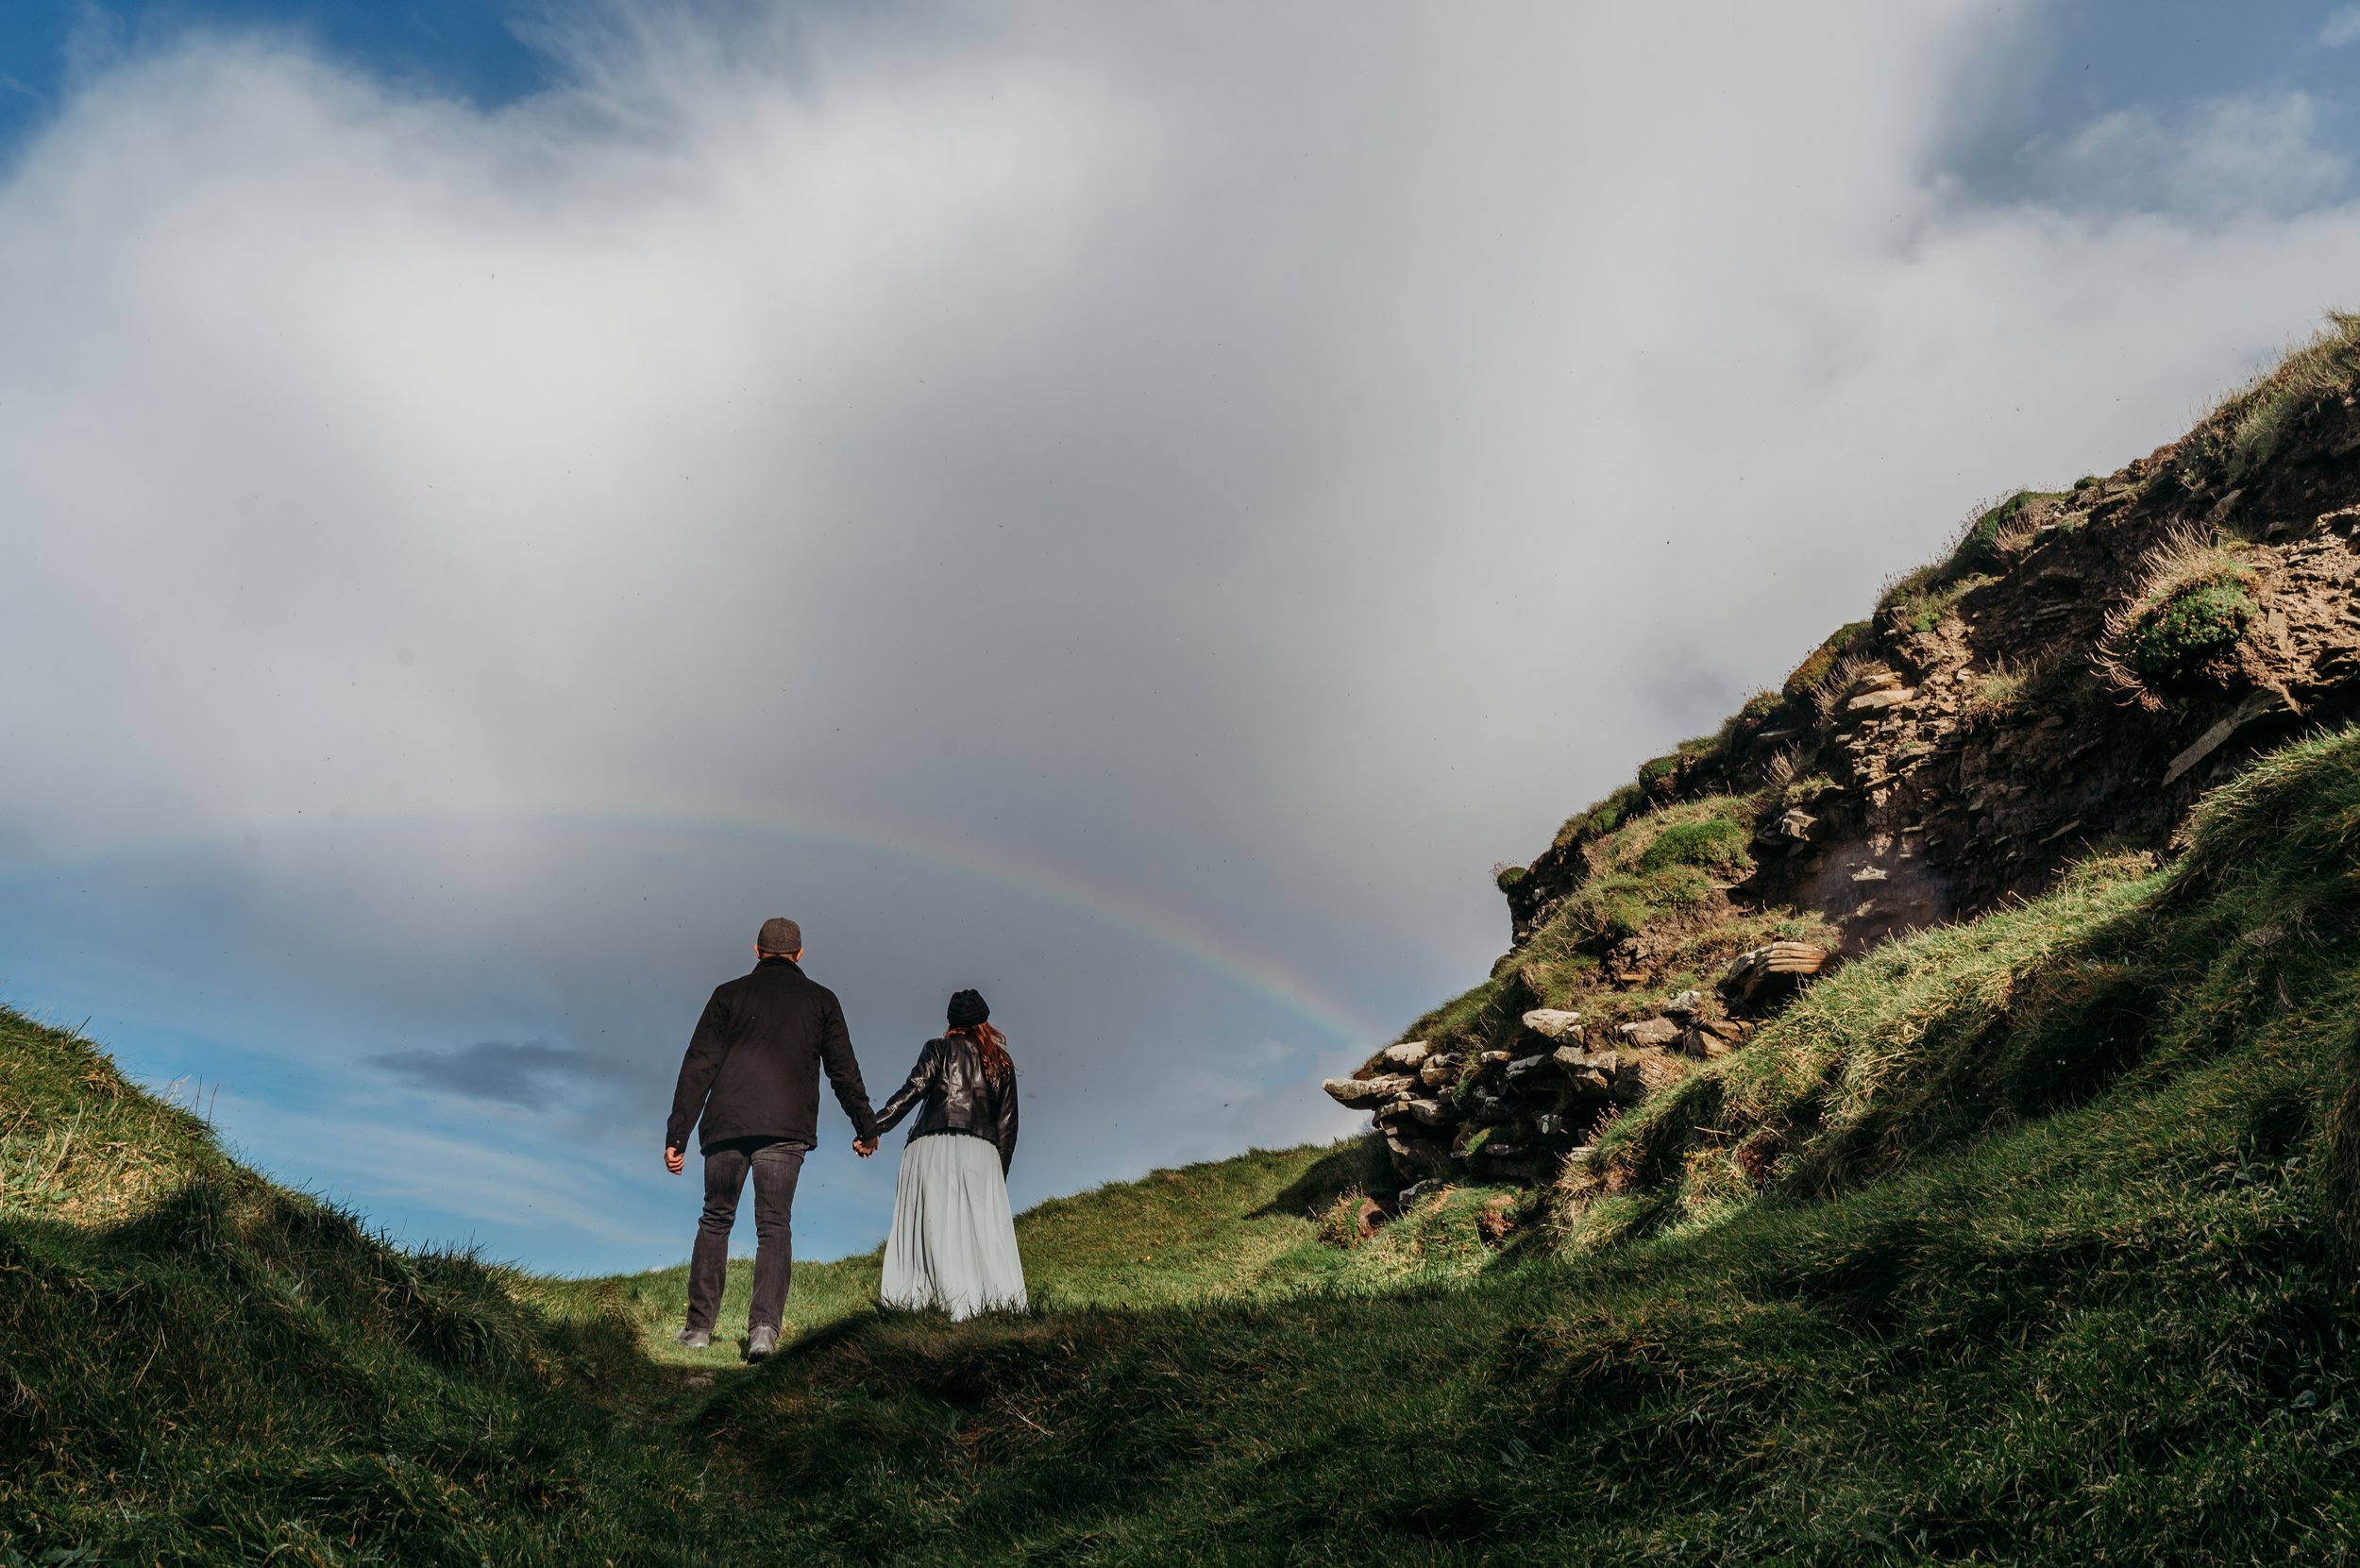 Marie O'Mahony photographer Cliffs of Moher anniversary couples photo session walking under the rainbow